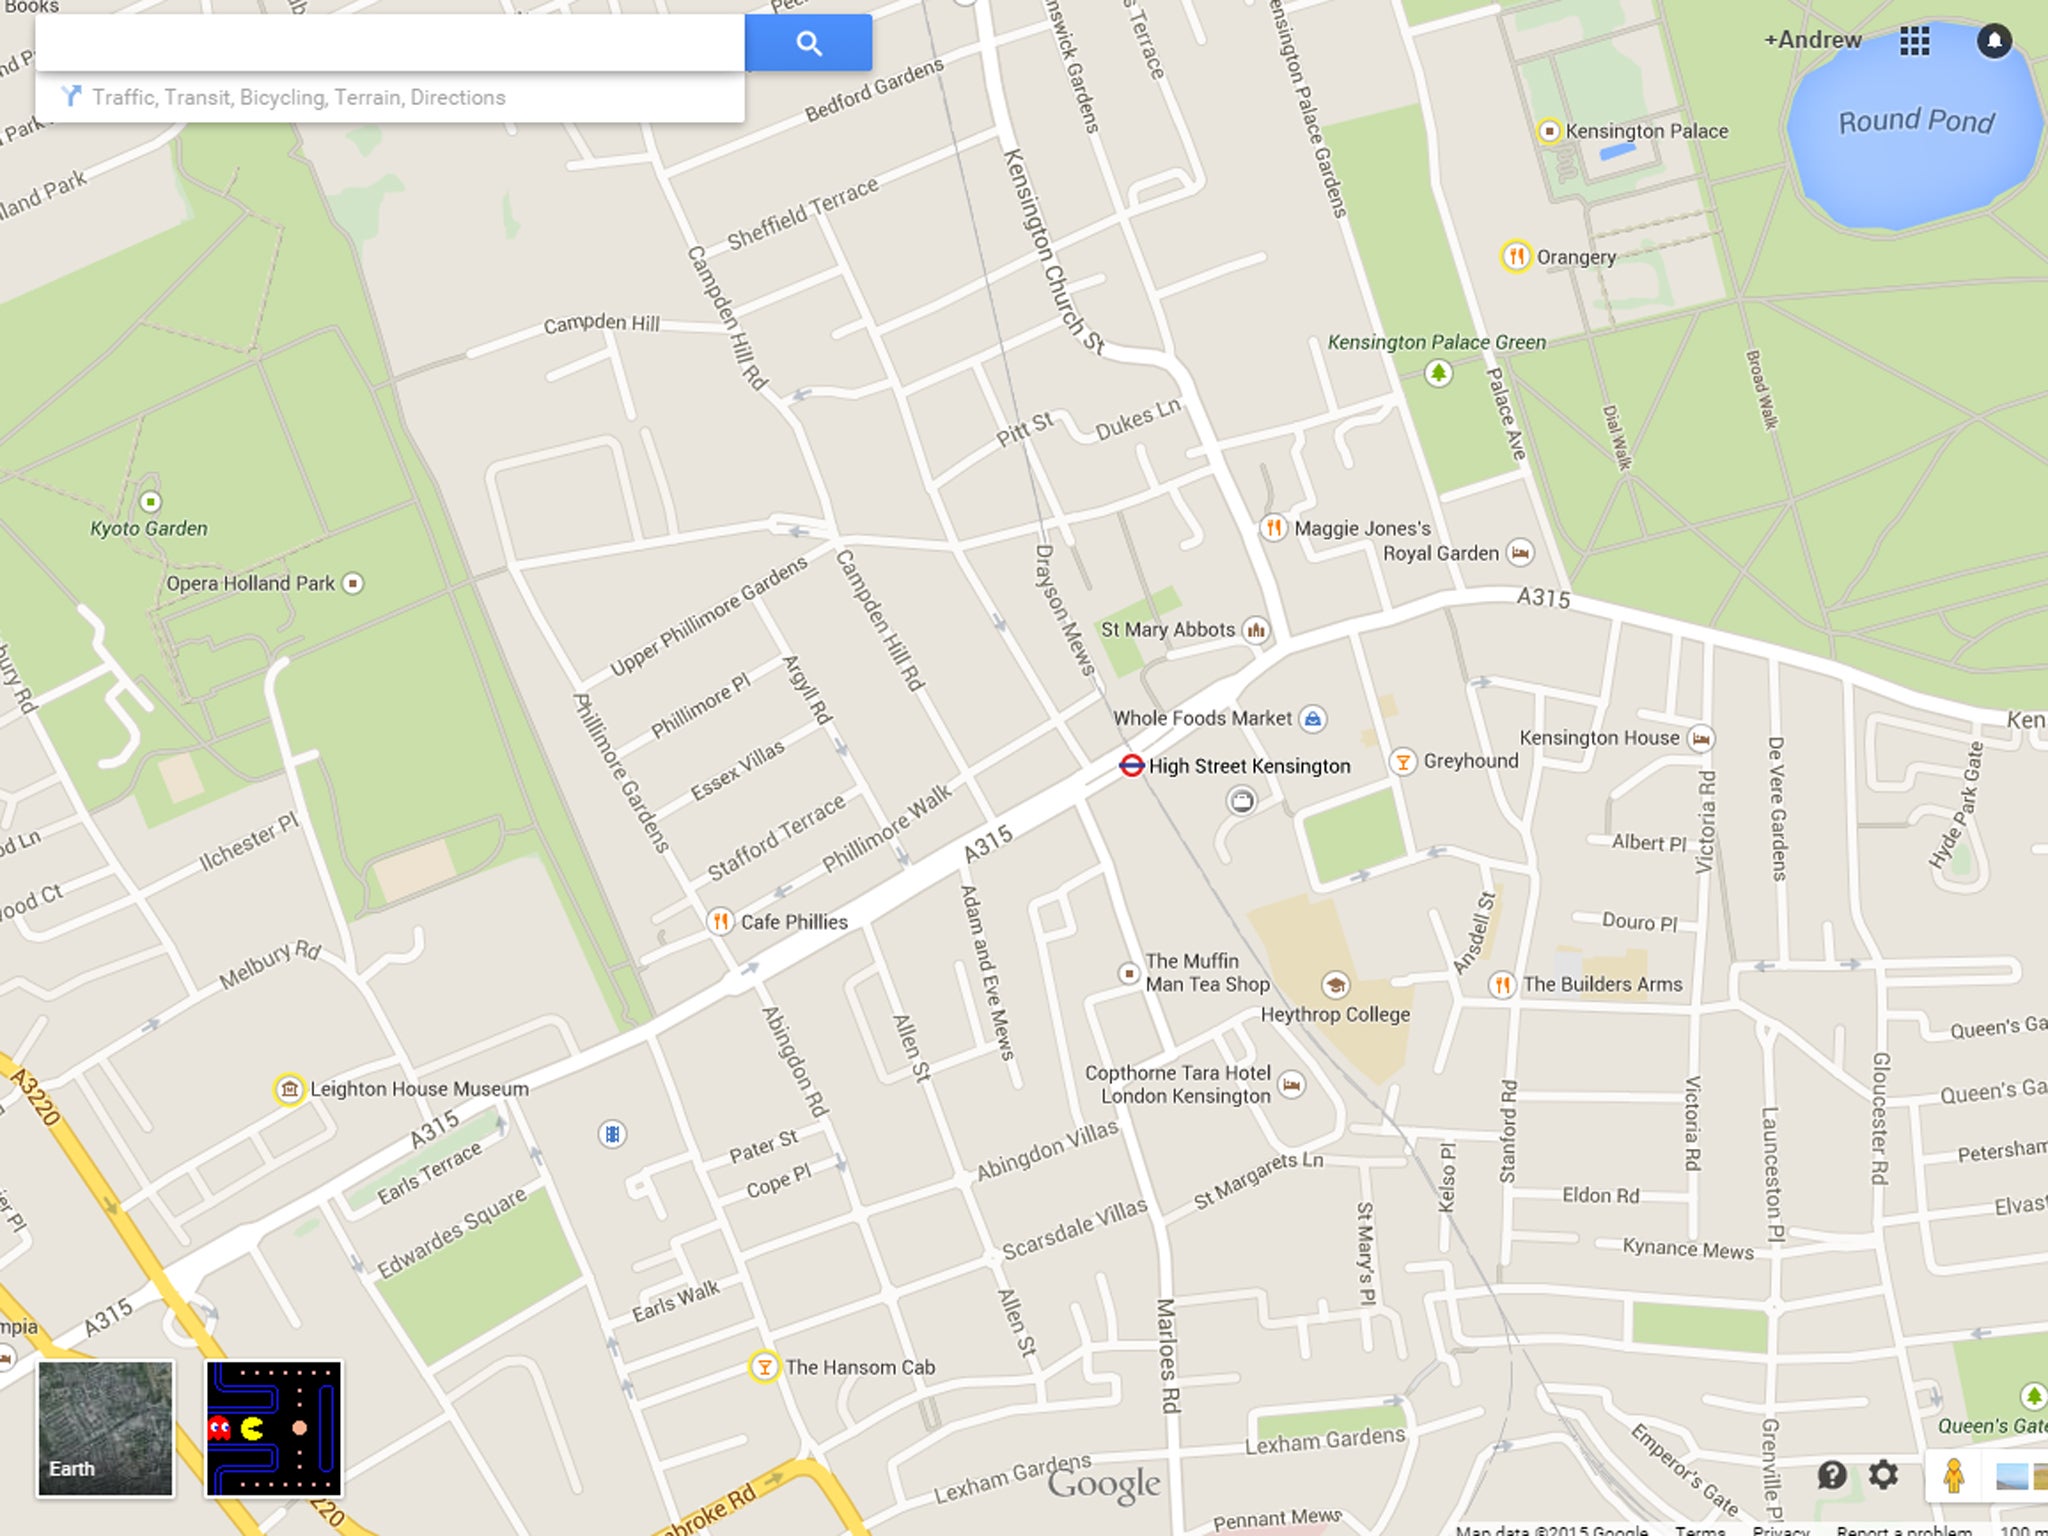 Google Maps, showing the area around The Independent's offices. The Pacman icon is in the bottom-left corner, next to the 'Earth' one